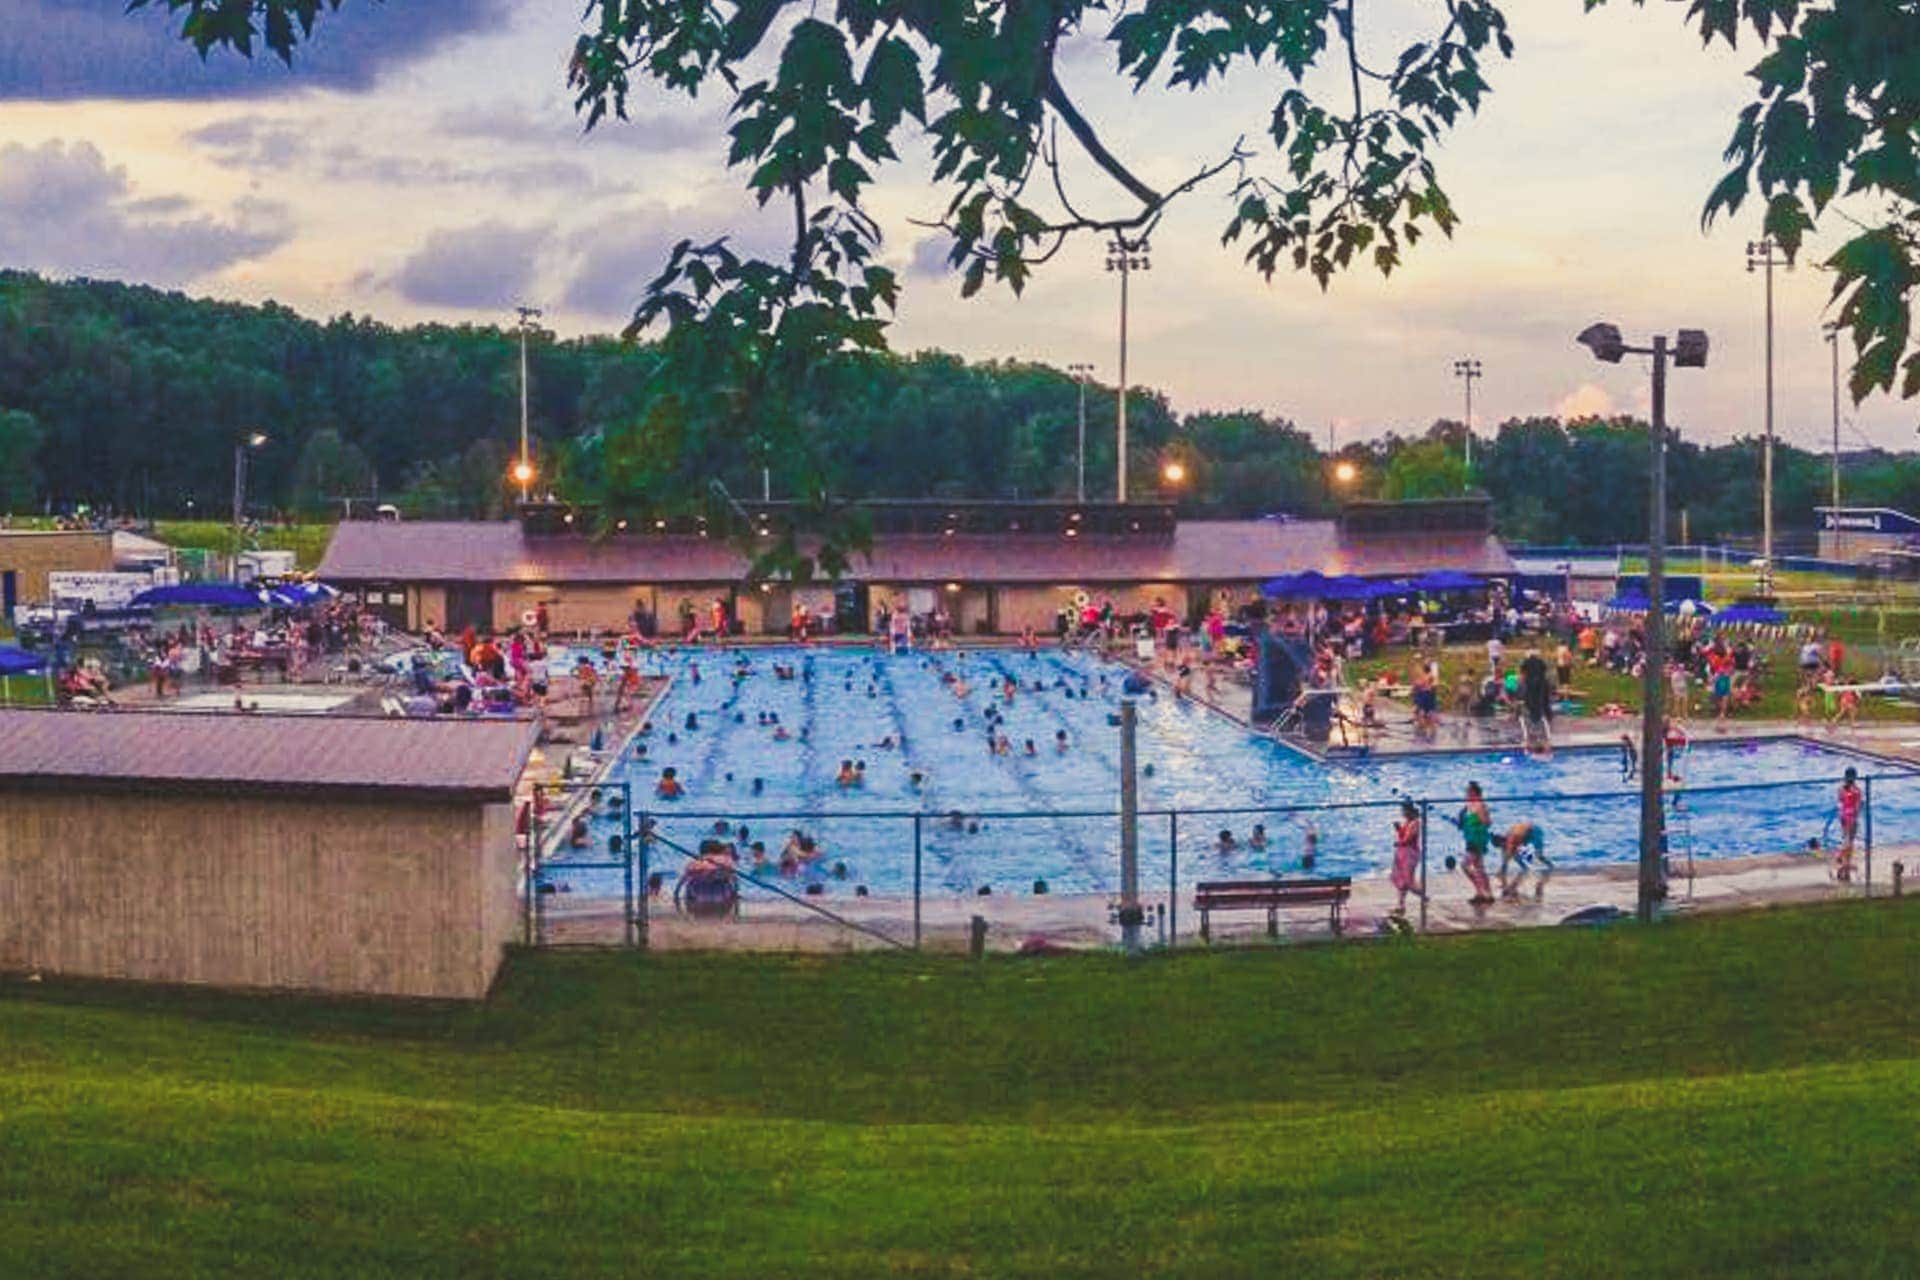 The Upshur County Swimming Pool